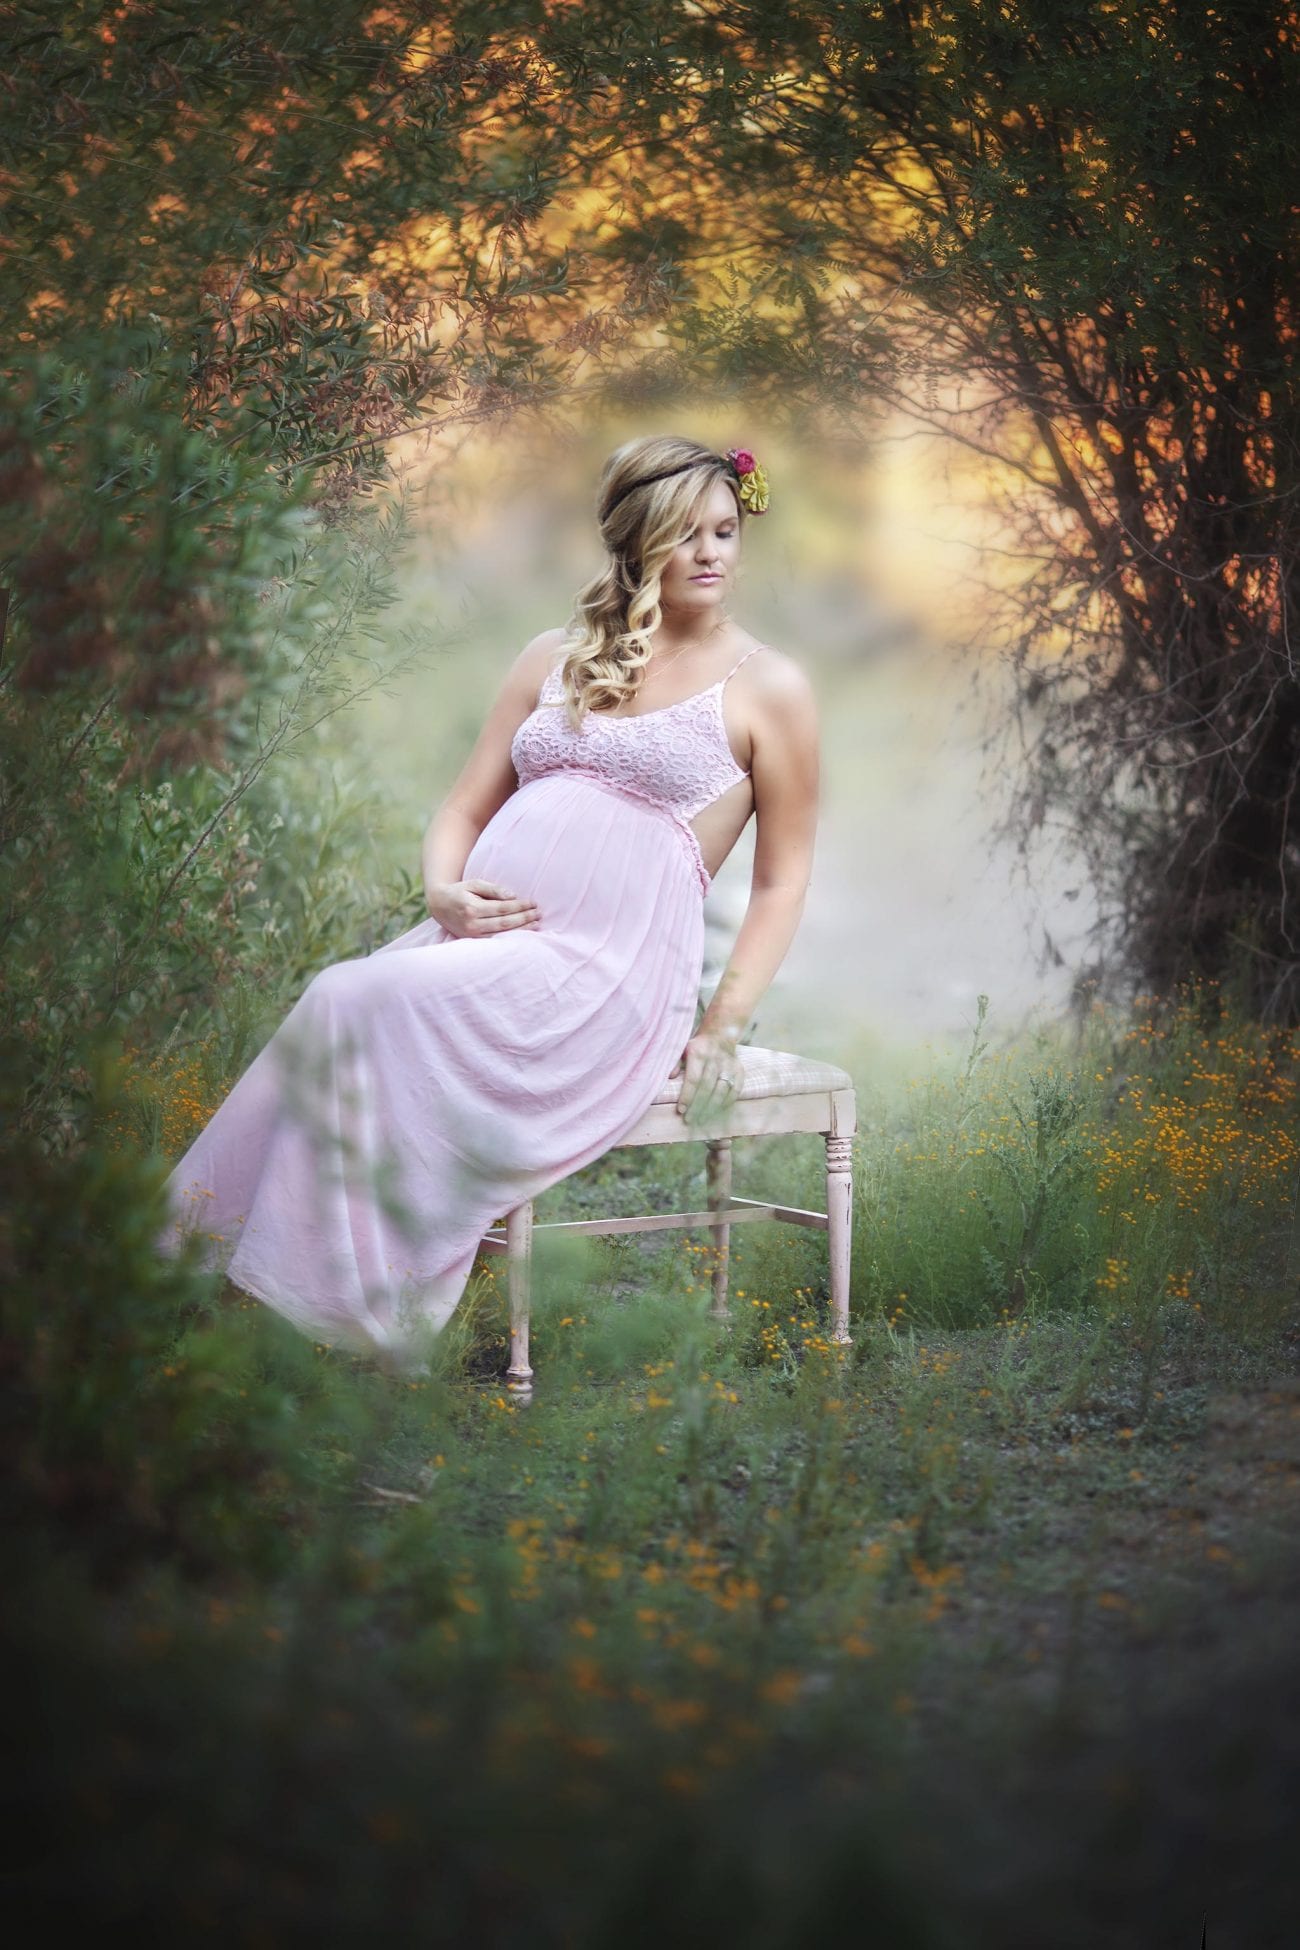 Maternity photography near downtown Phoenix in green grassy field location. Model is wearing a flower crown and flowing pink maternity gown